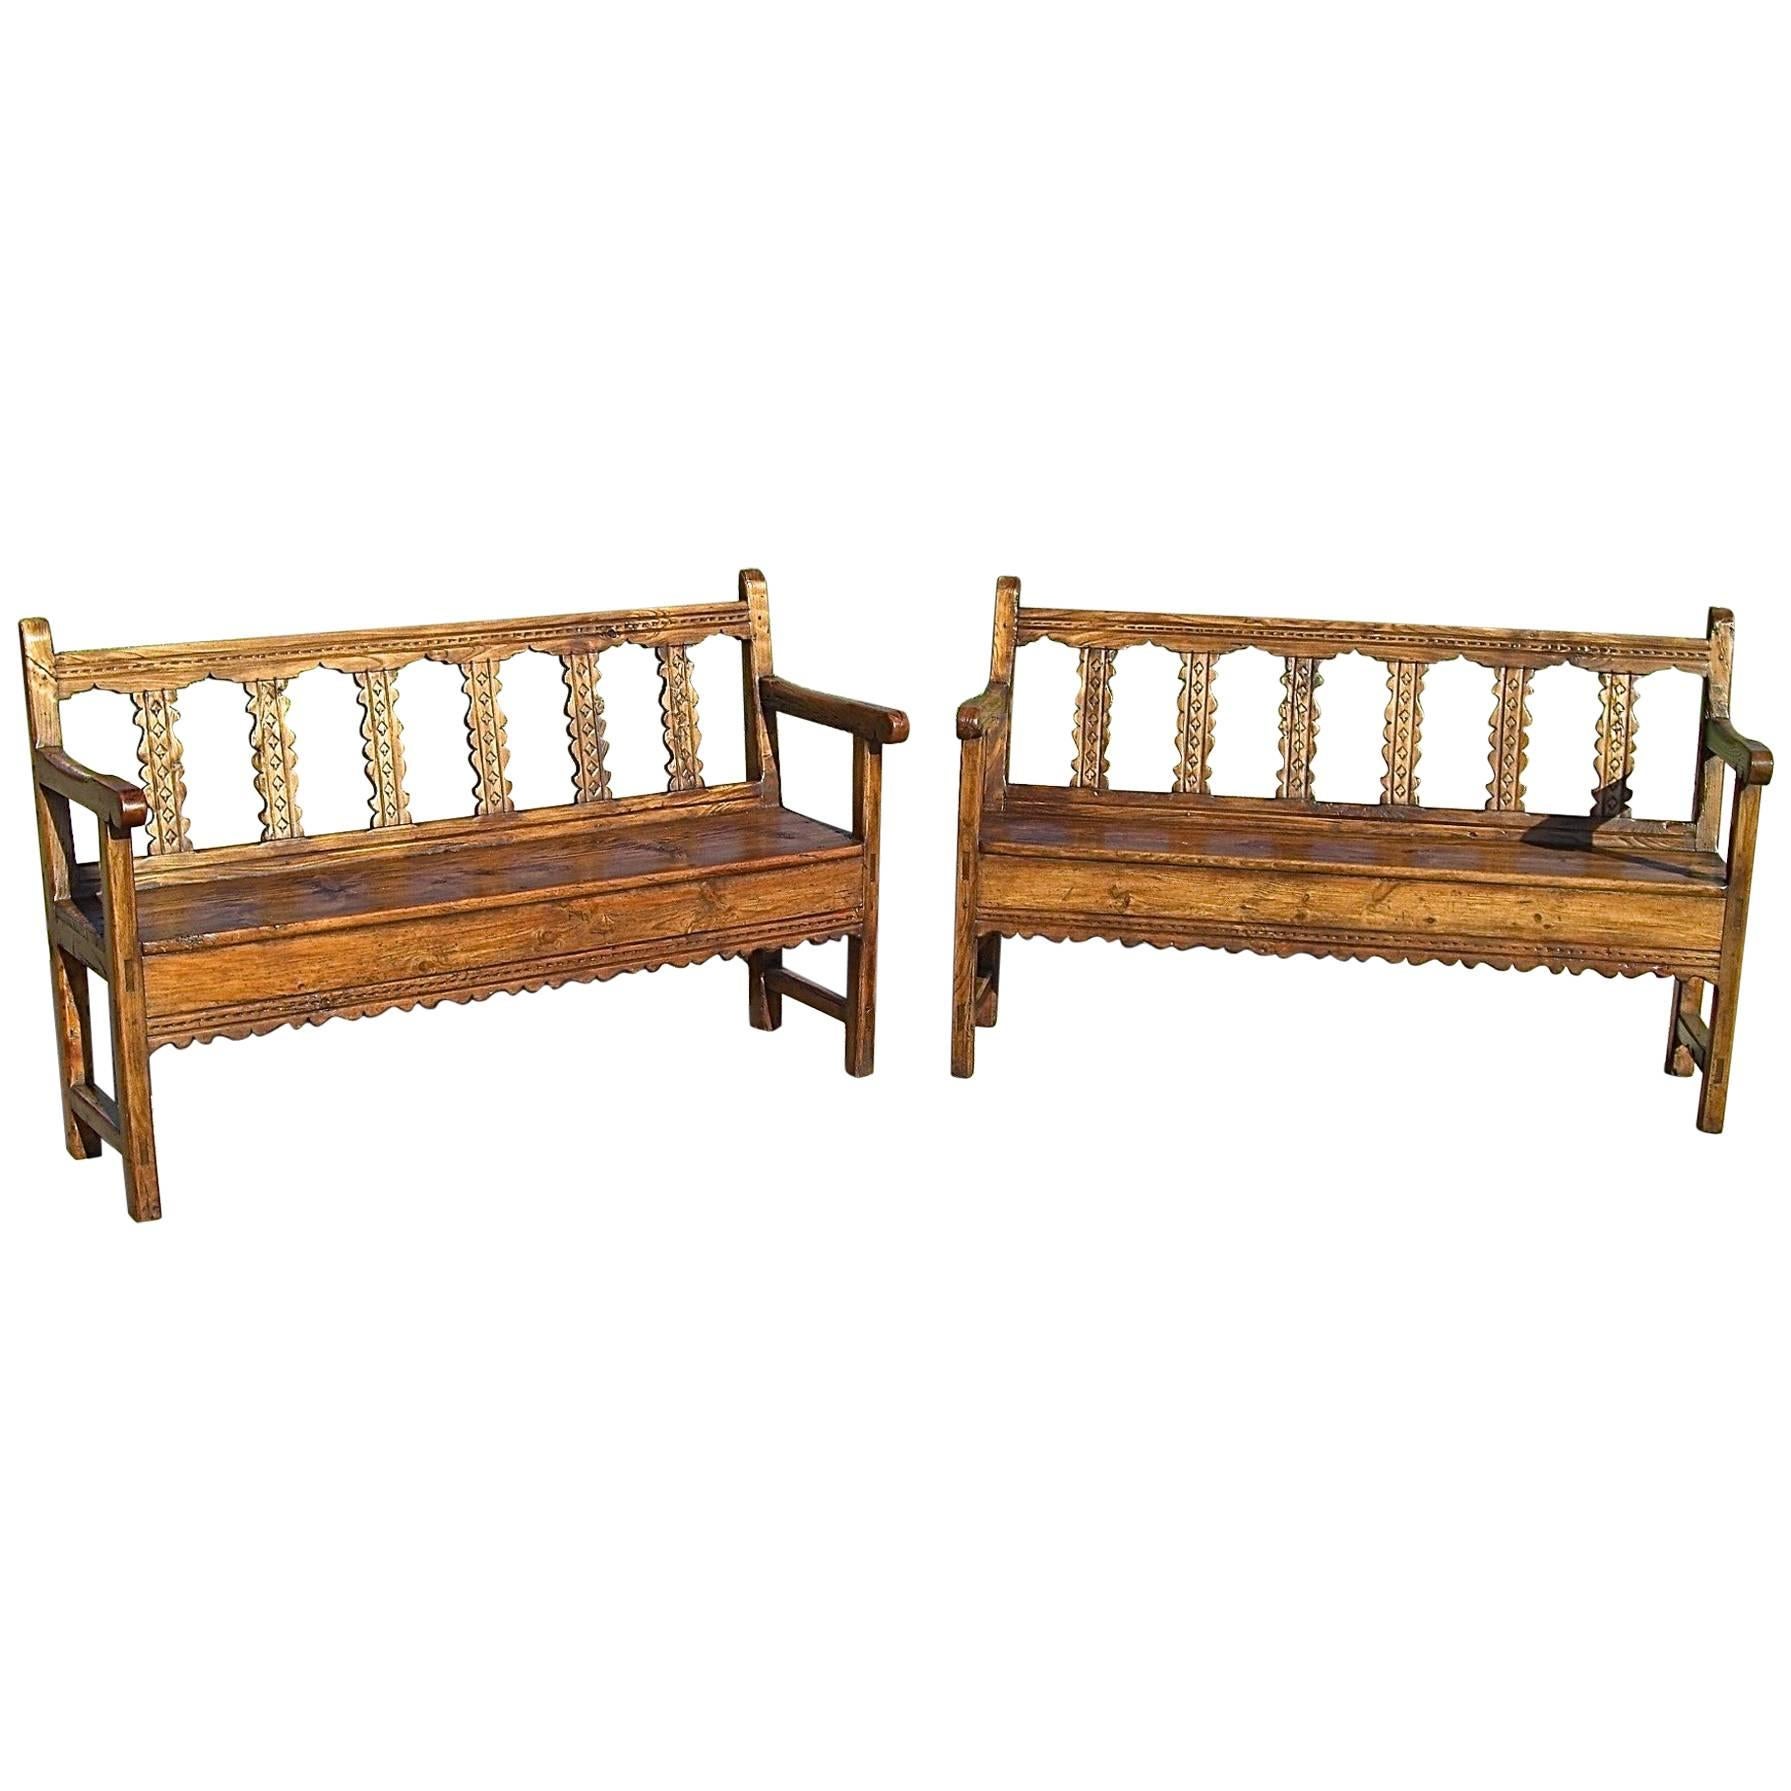 Matched Pair of Late 18th Century Pine and Elm Pyrenees Benches